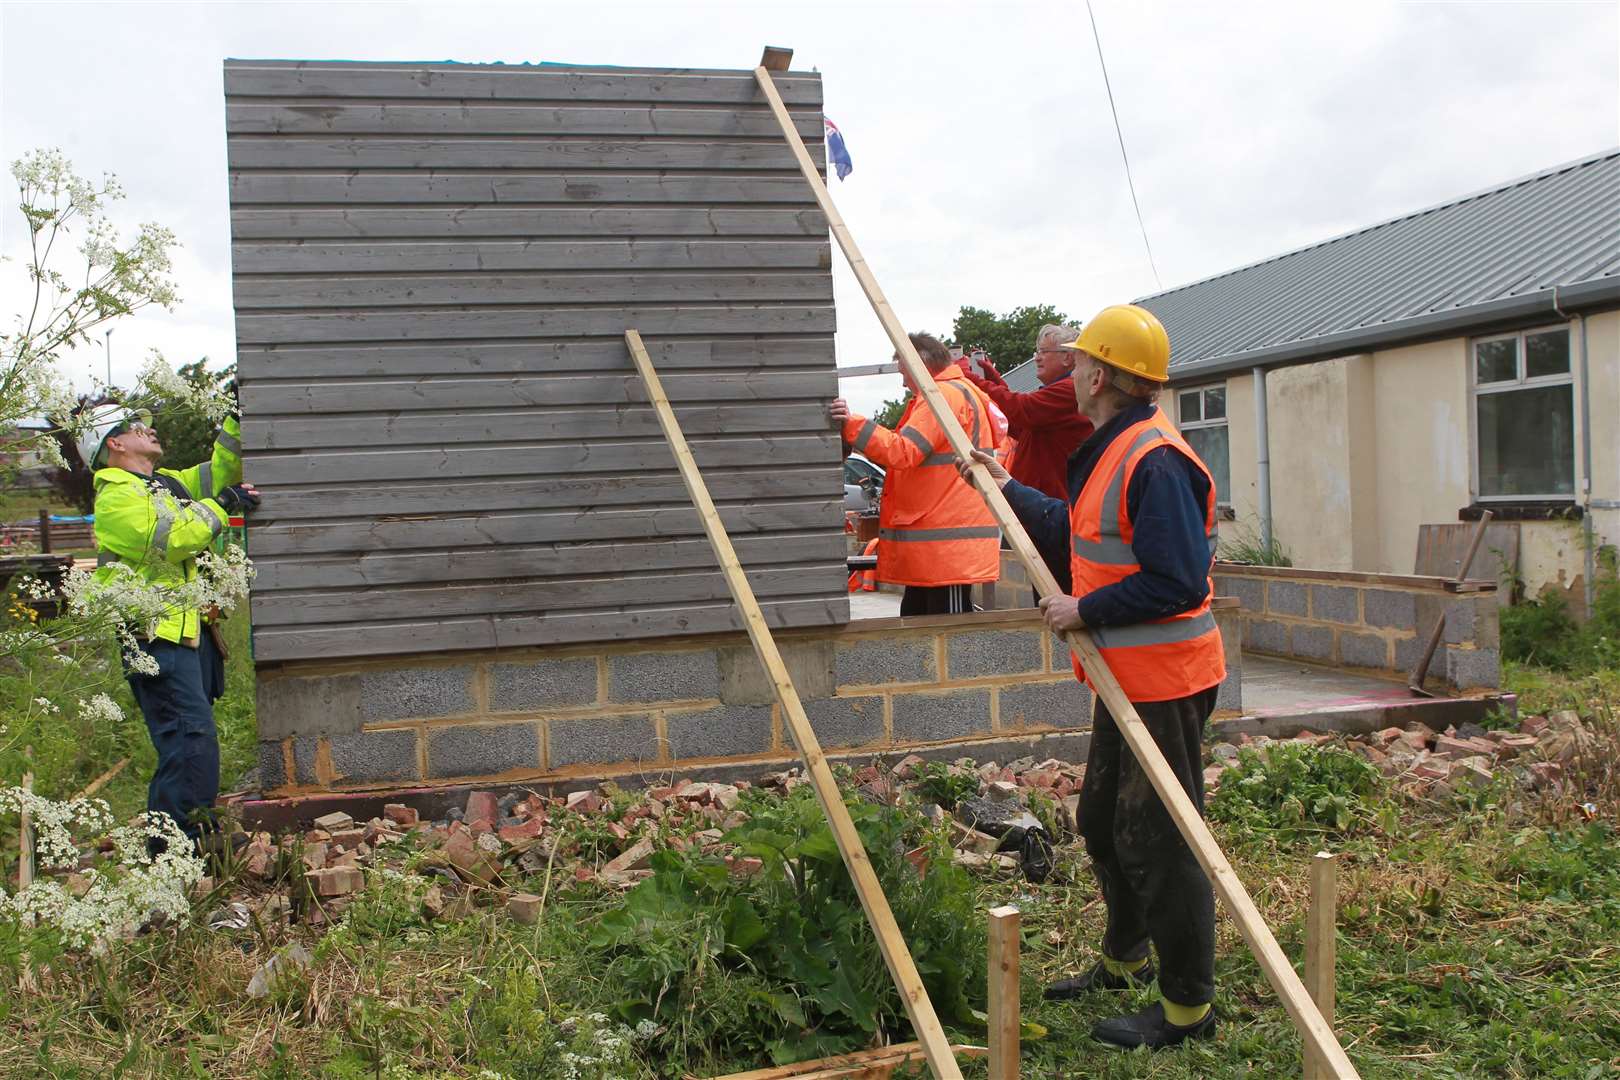 Martin Hawkins, chairman of the Trustees with other volunteers putting up the first panel on an extension to Eastchurch Aviation Museum. Picture: John Westhrop.(11971167)